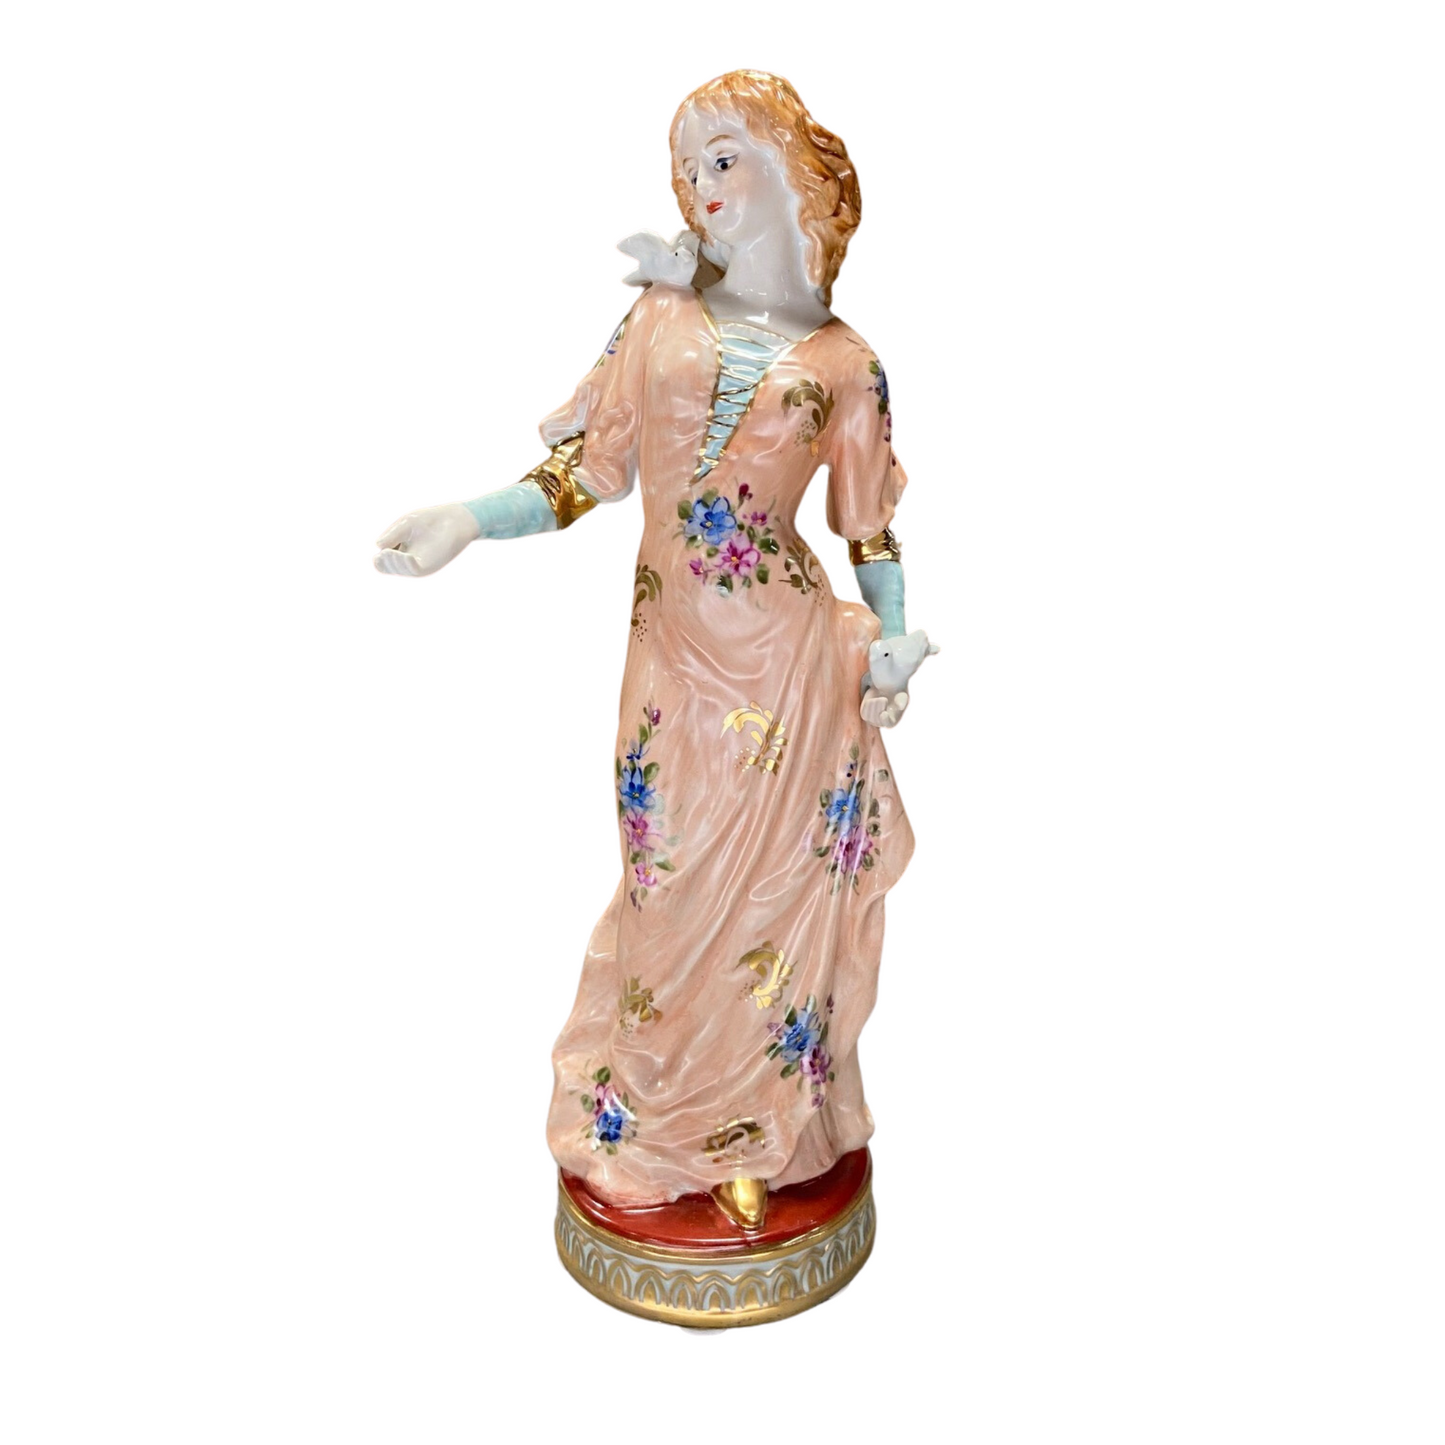 Woman With a Dove Porcelain Figurine